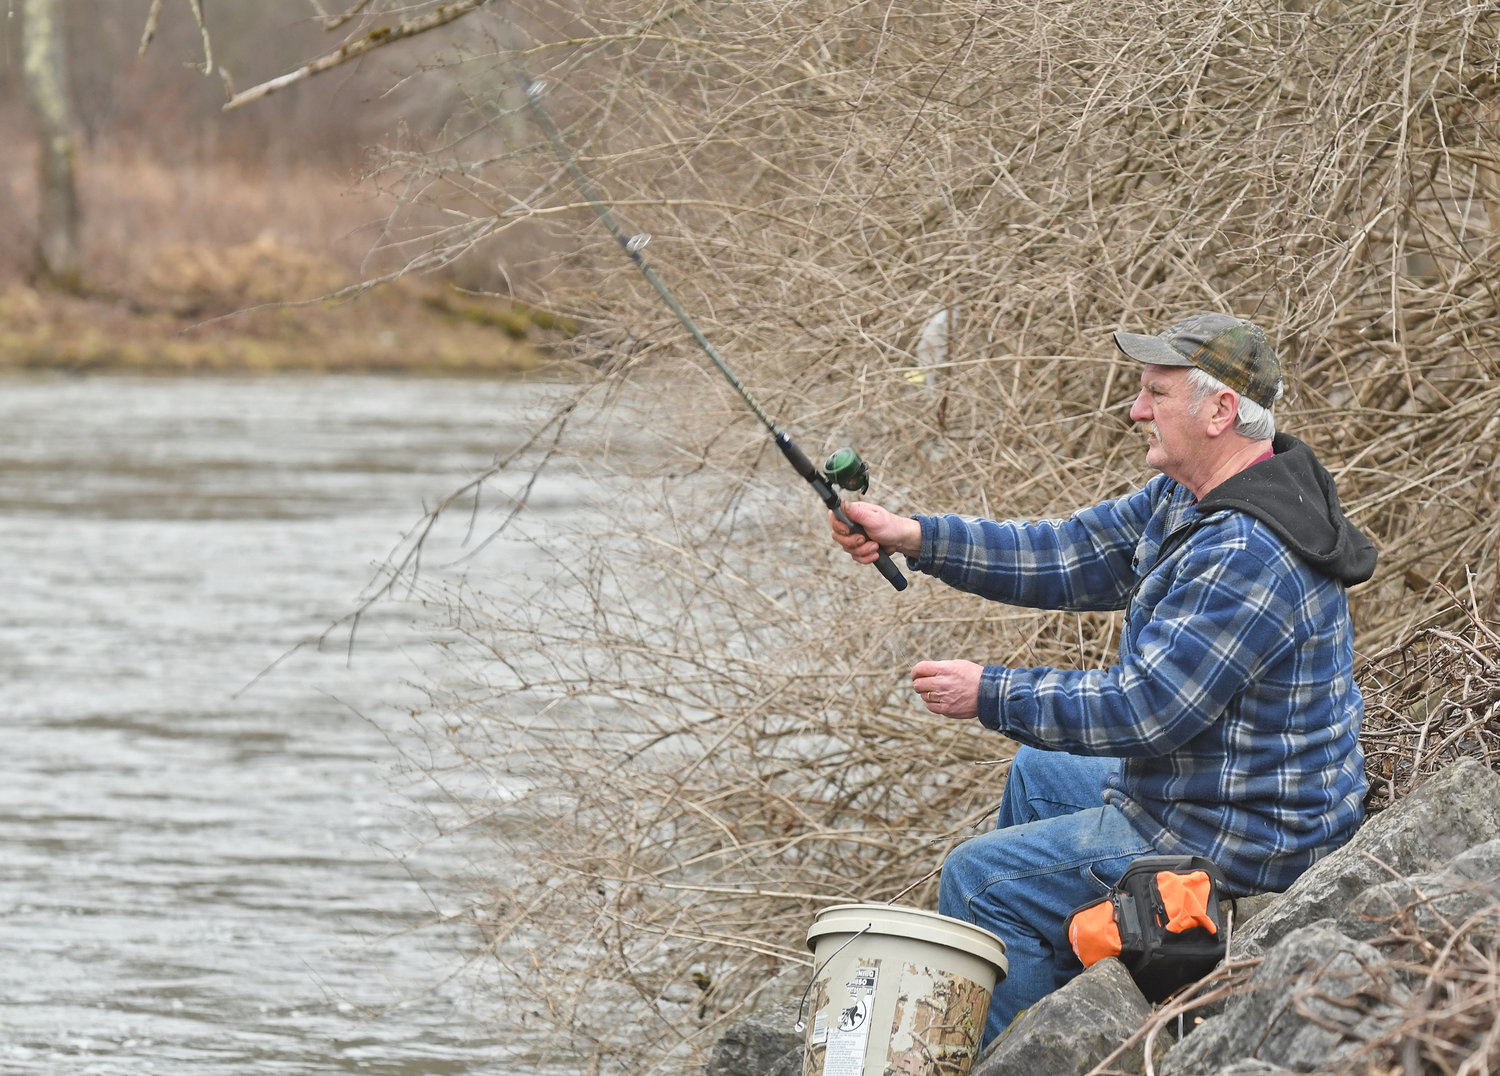 CASTING HIS LINE — Ricky Wannyn, of Camden, casts his line out on the Mohawk River Friday morning on the first day of trout fishing season. Previously, April 1 was considered the traditional “opening day” for trout fishing season in the state. Now, with state Department of Environmental Conservation’s change to the new year-round catch-and-release season, the April 1 date marks the end of catch-and-release and the beginning of the harvest season.